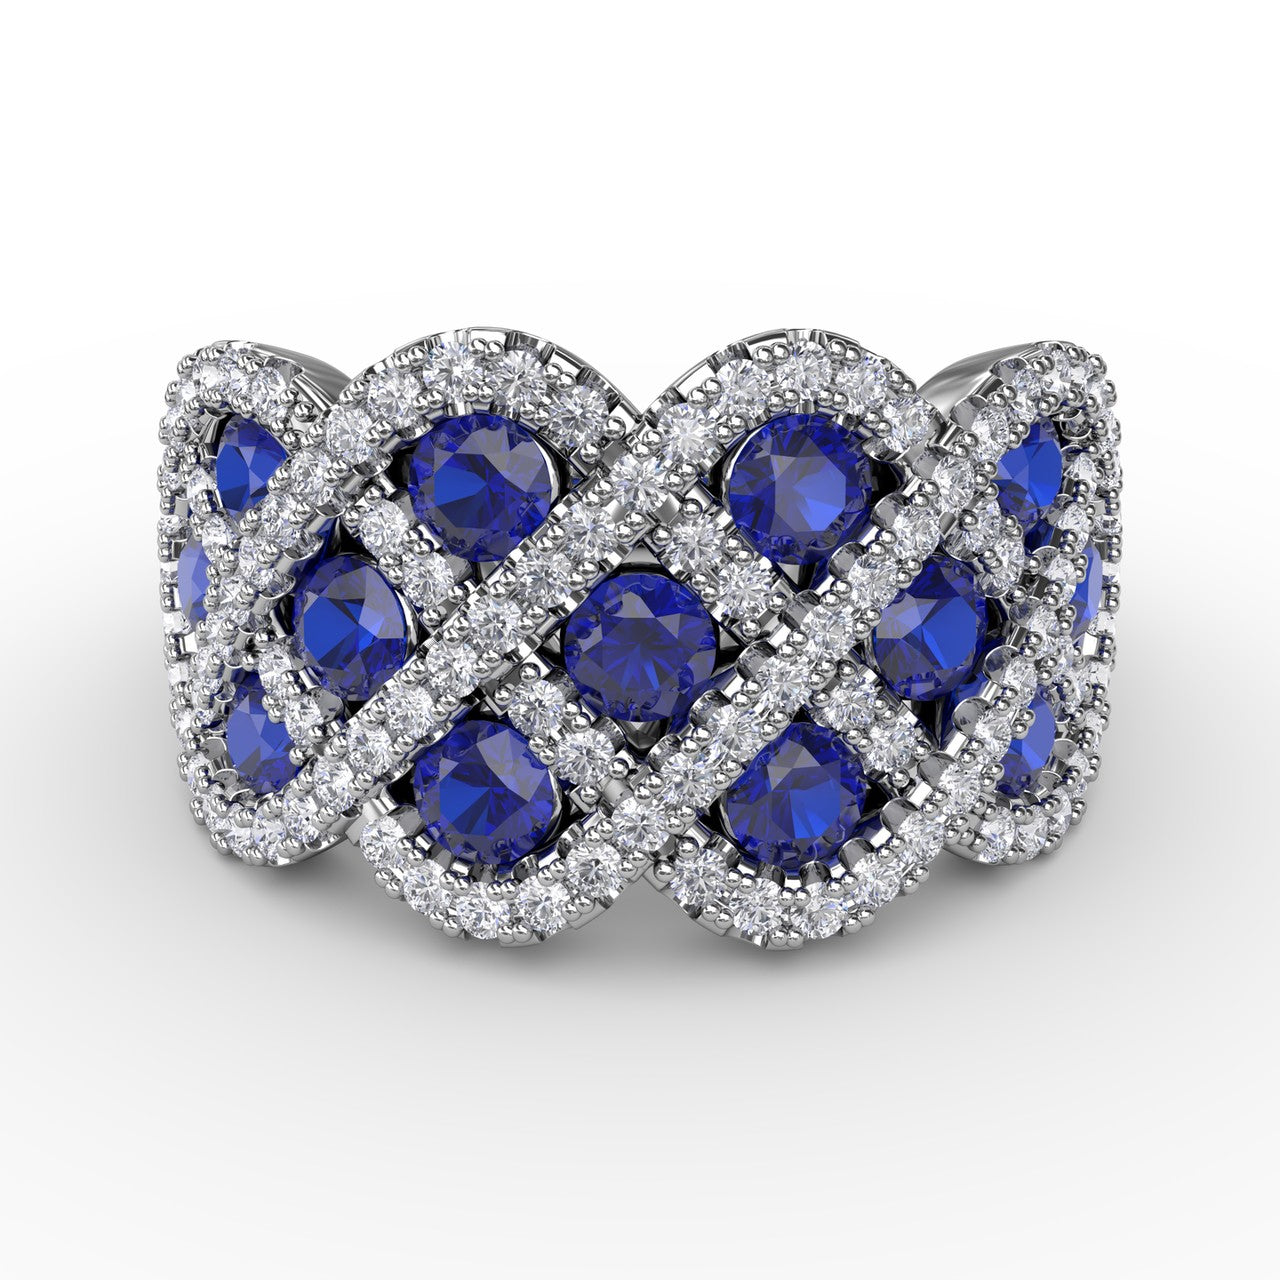 You And Me Sapphire And Diamond Interweaving Ring